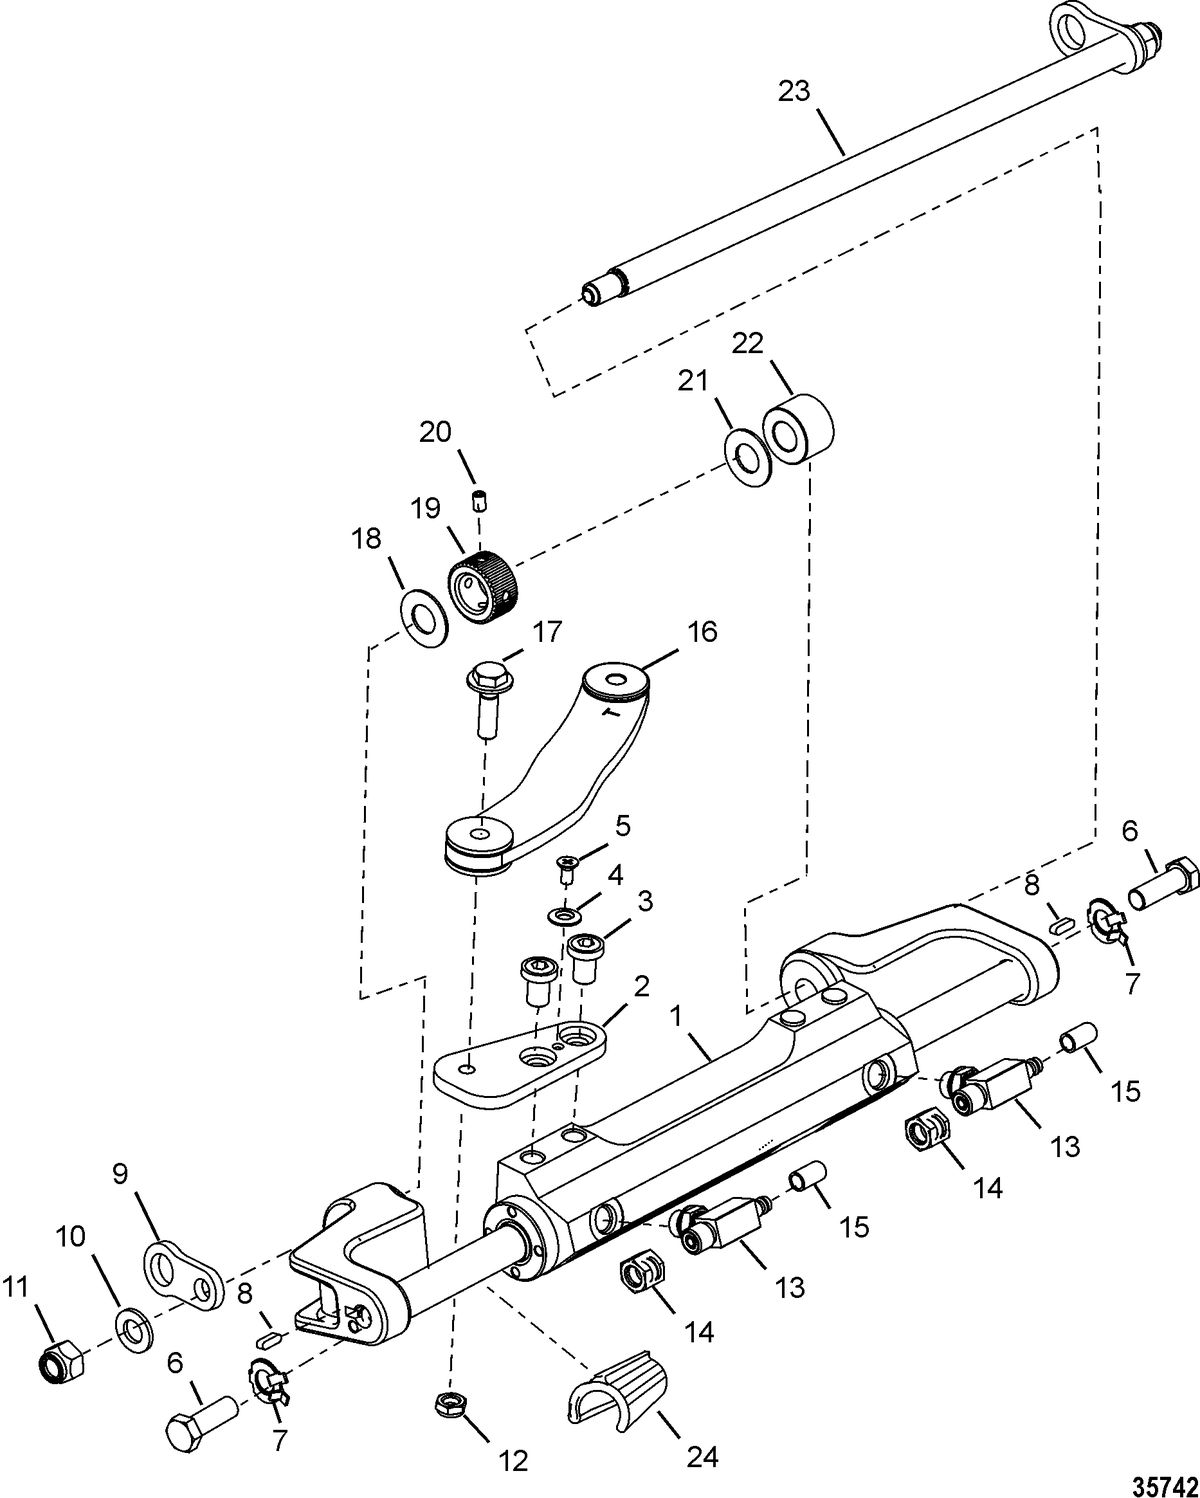 ACCESSORIES STEERING SYSTEMS AND COMPONENTS Steering Actuator Assembly(898349A05)